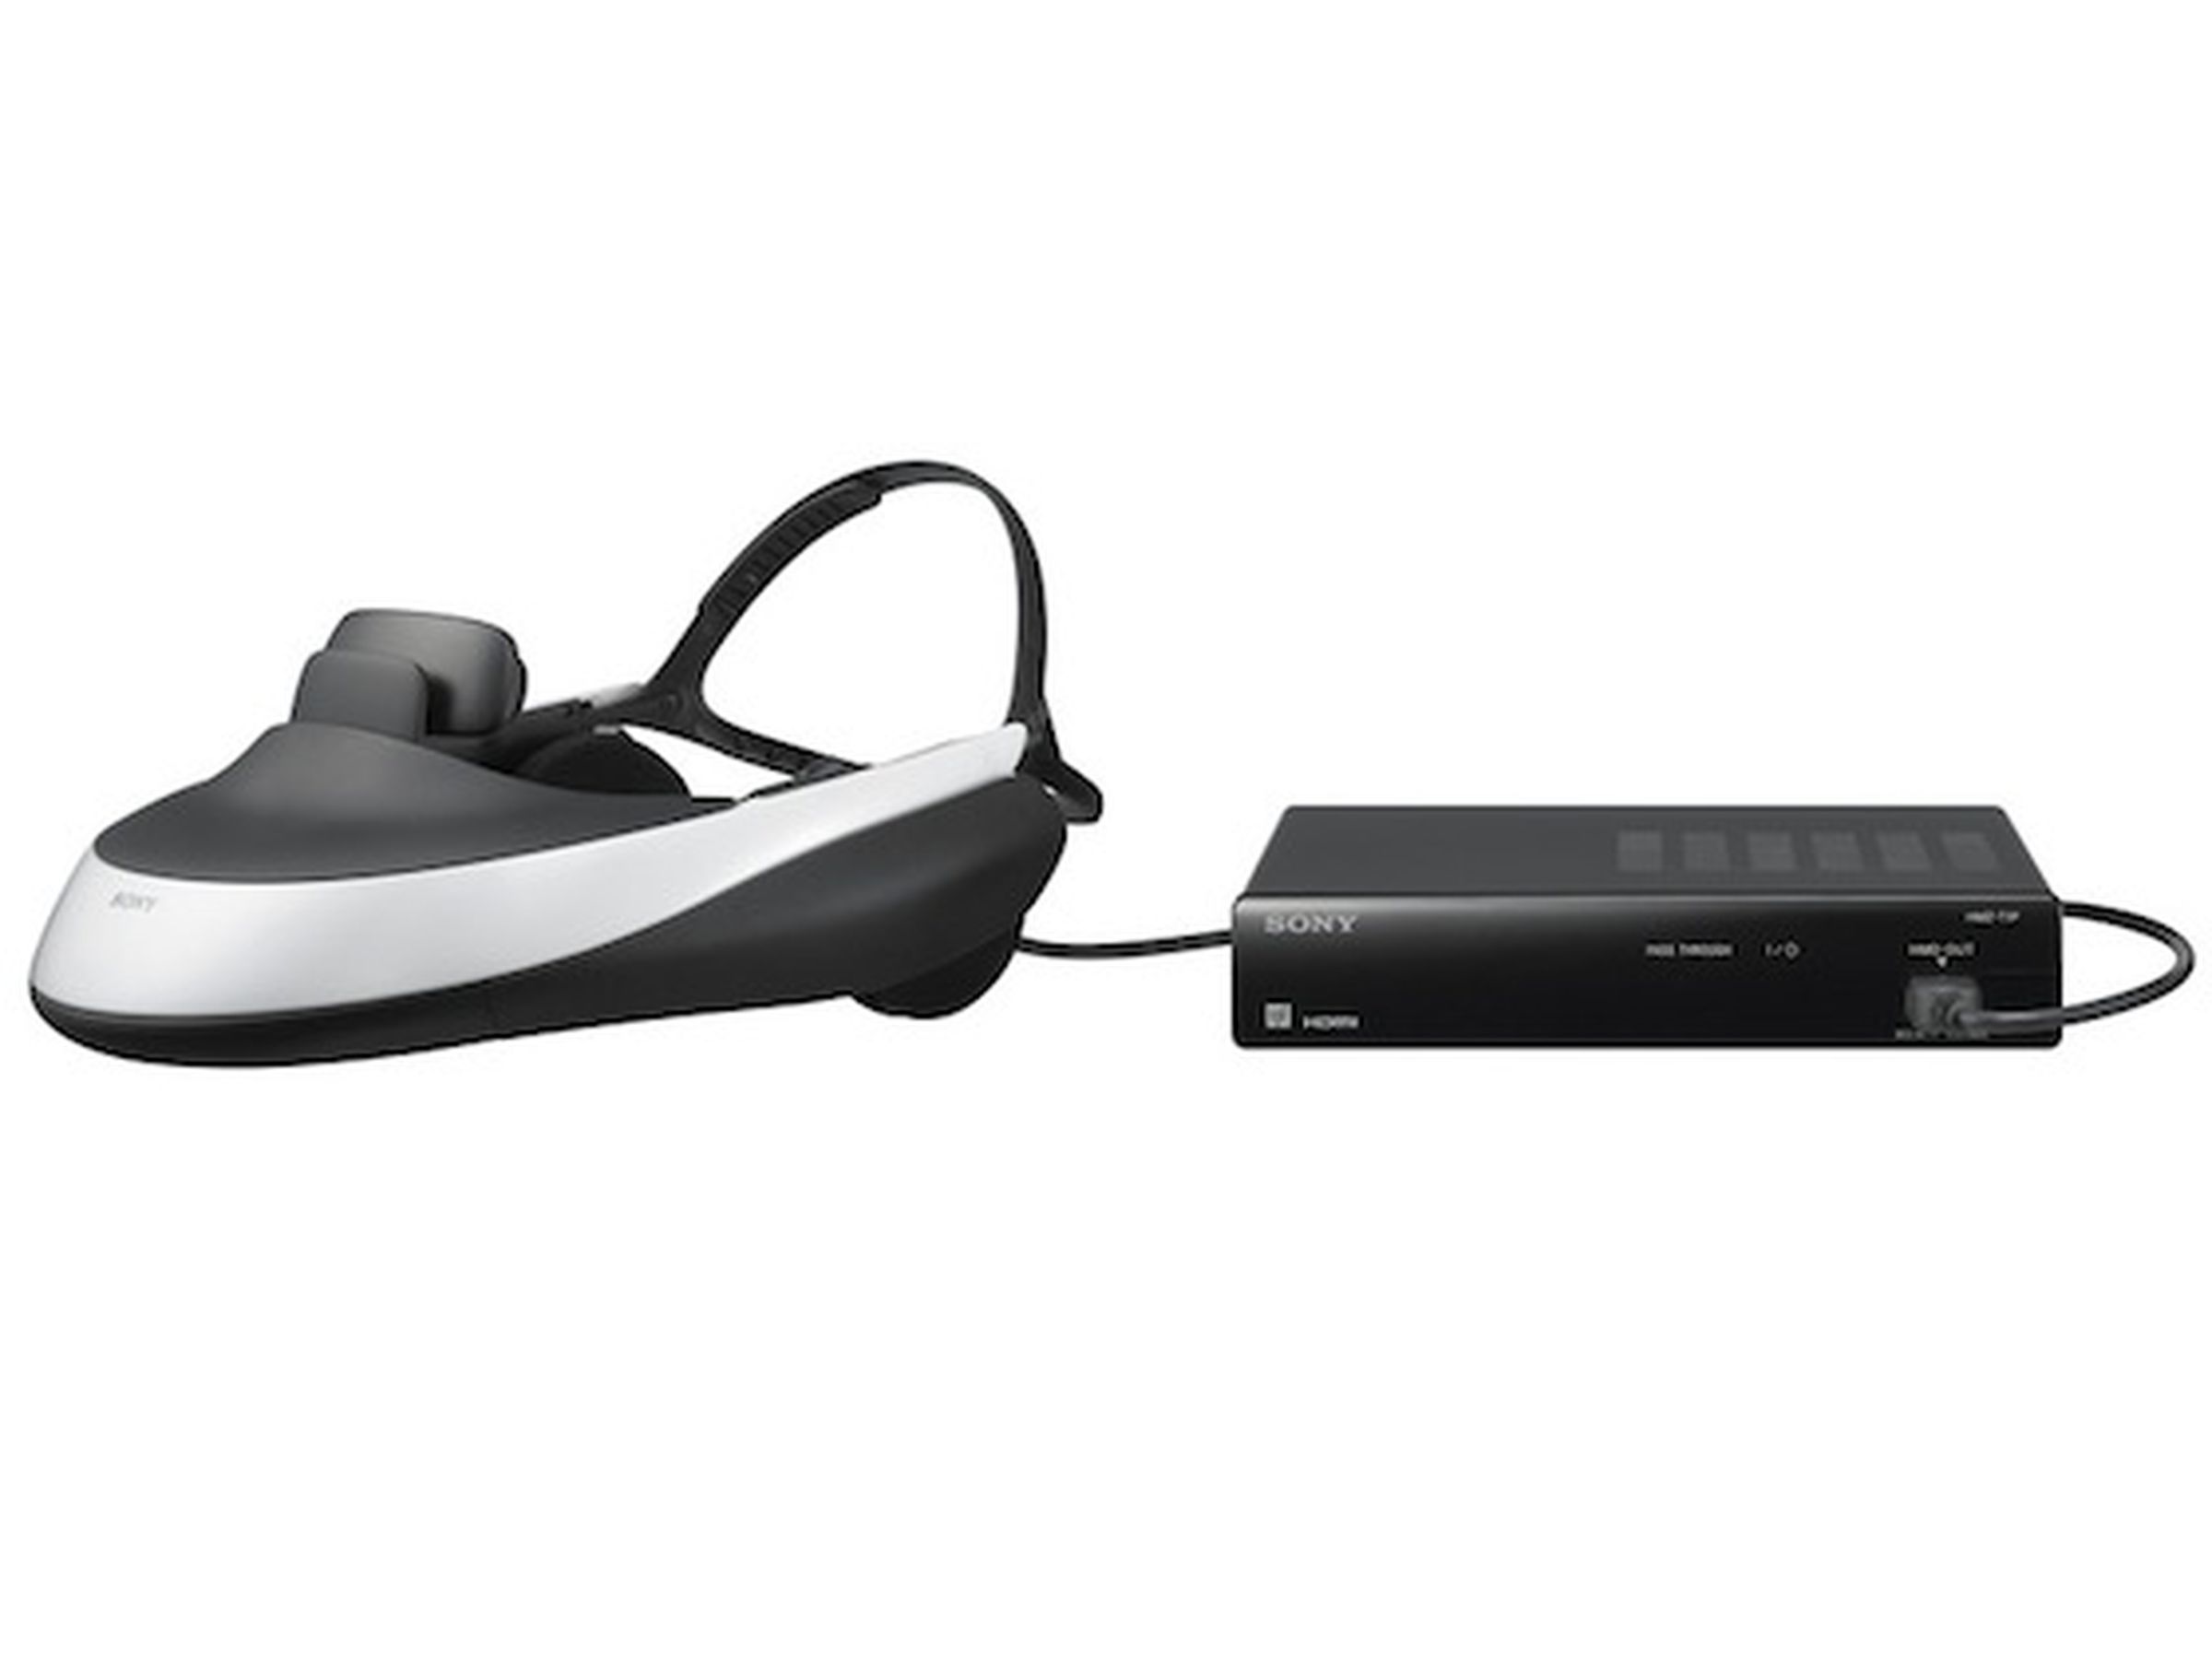 Sony HMZ-T1 head-mounted ‘Personal 3D Viewer’ with OLED screens announced